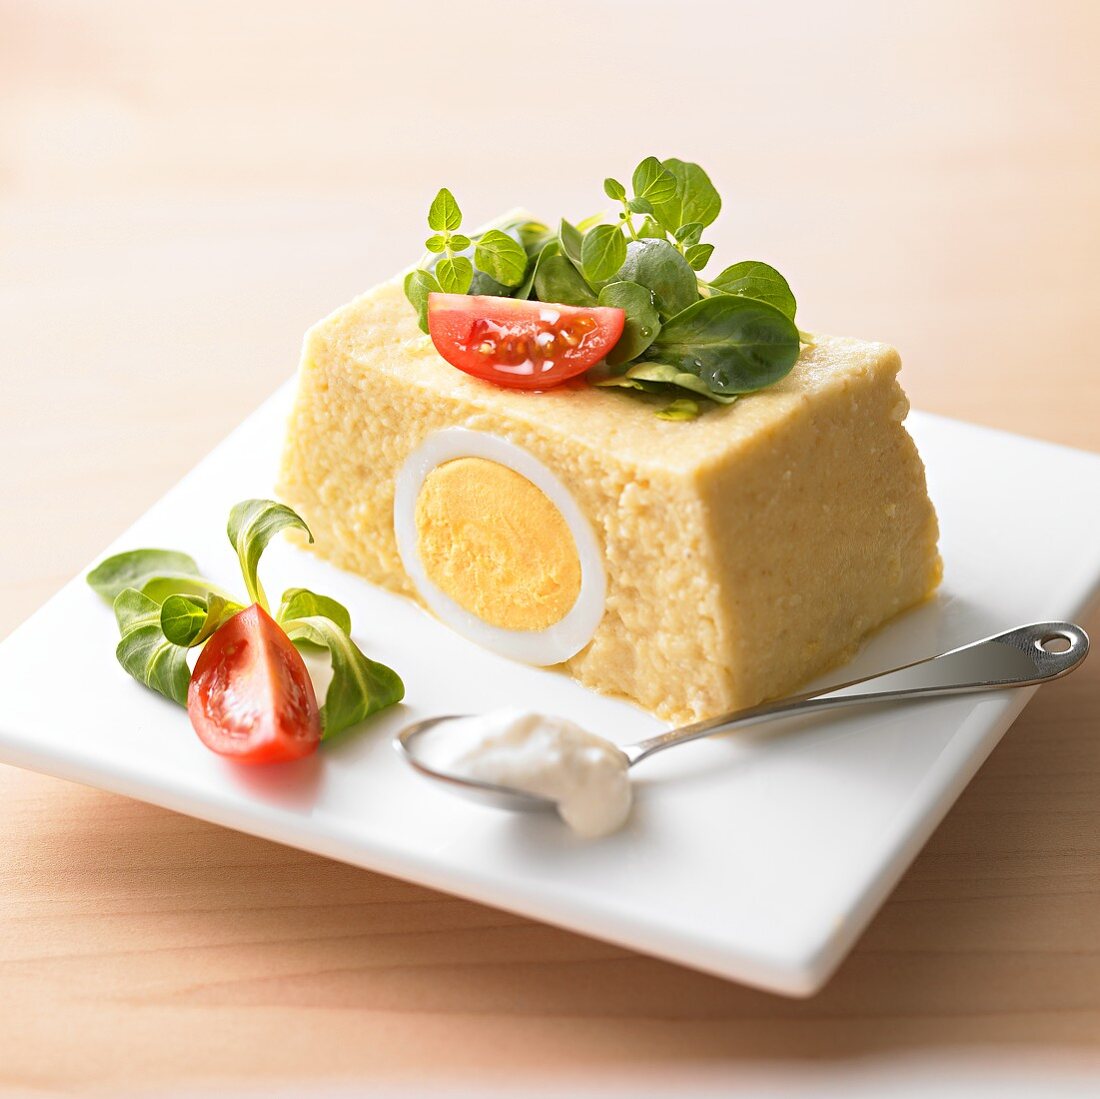 Fish terrine with egg and sour cream